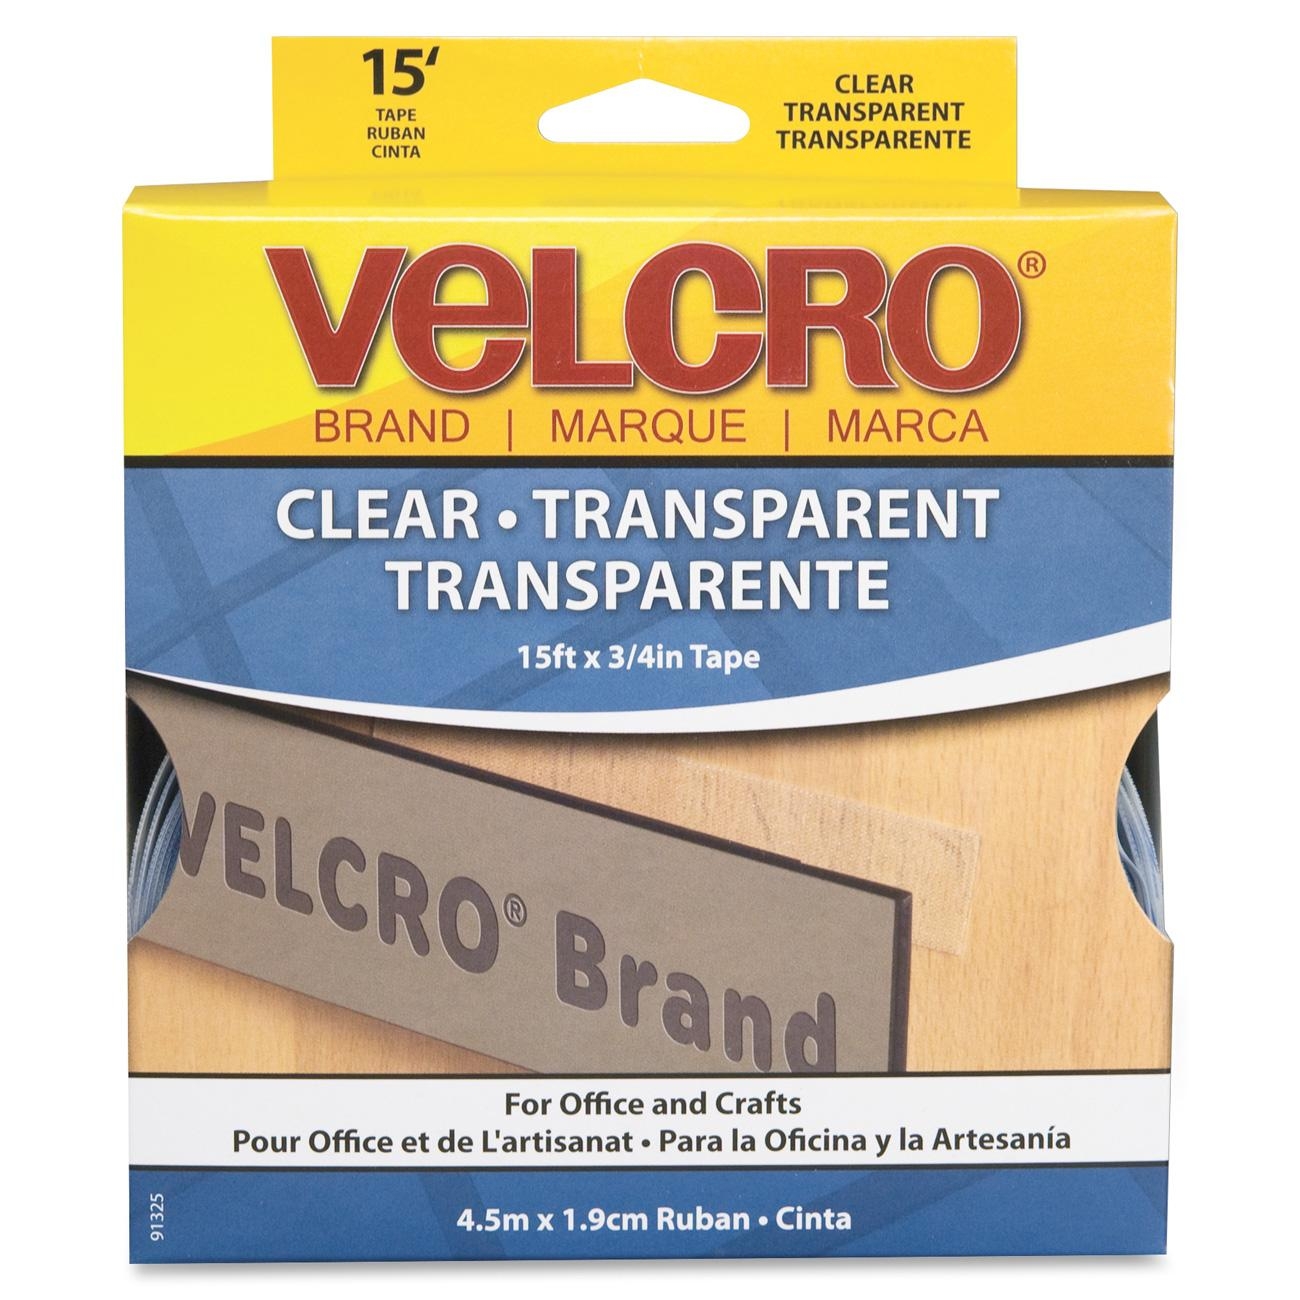 Velcro 90081 Sticky Back Hook and Loop Fastener Tape with Dispenser, 3/4 x 15 ft. Roll, Black